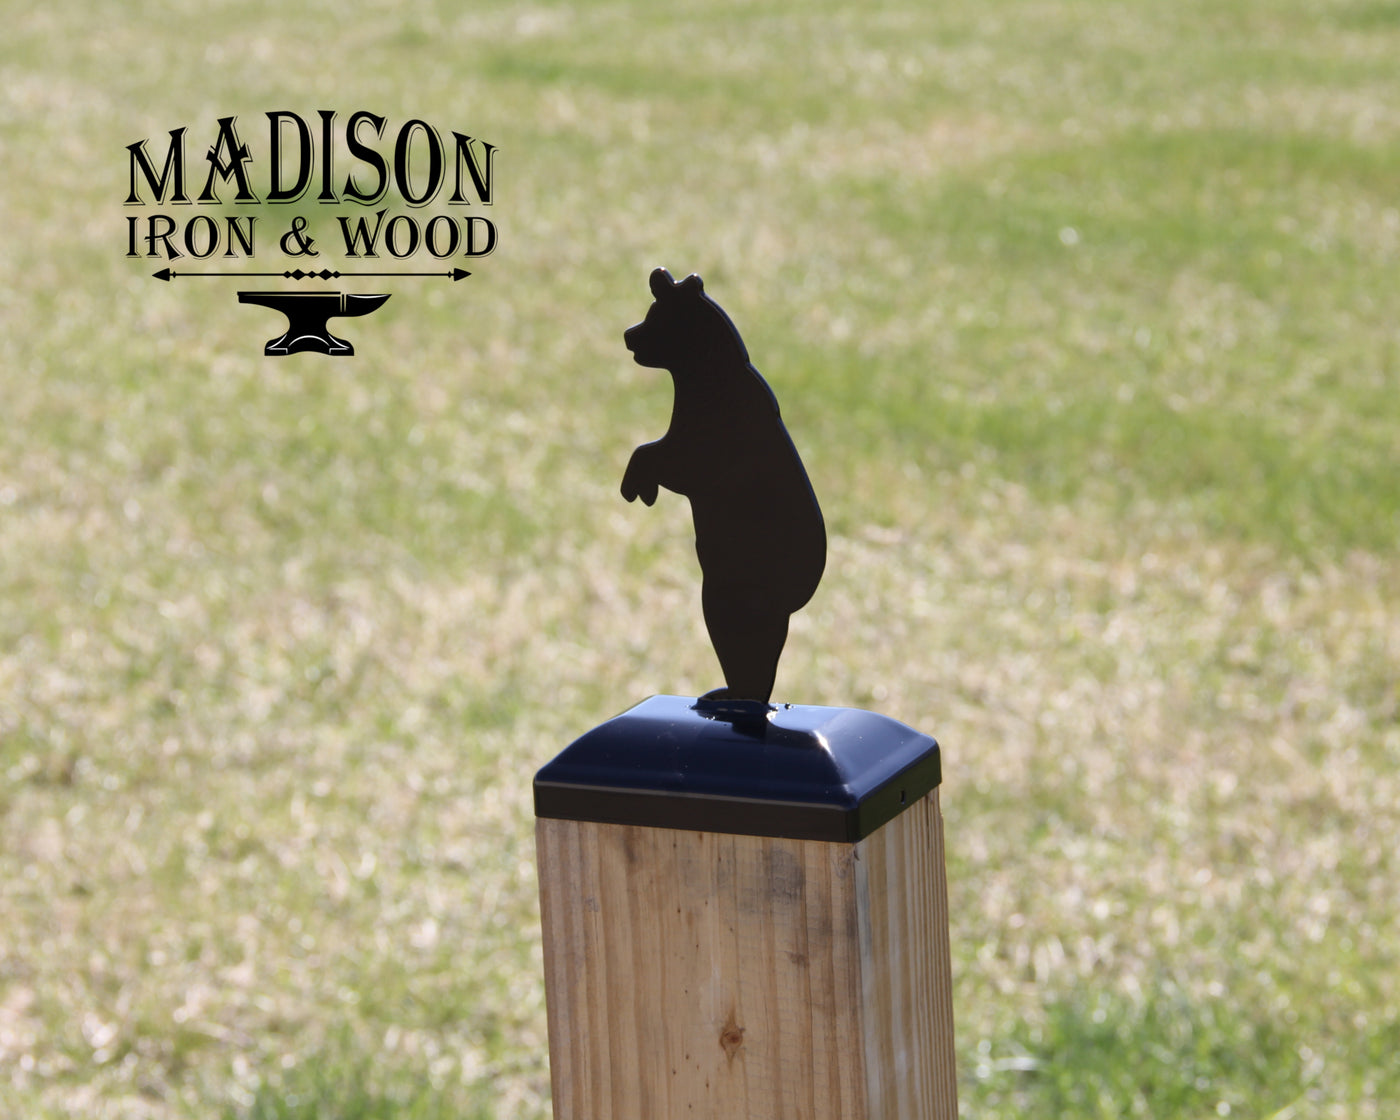 4x6 Standing Bear Post Cap - Madison Iron and Wood - Post Cap - metal outdoor decor - Steel deocrations - american made products - veteran owned business products - fencing decorations - fencing supplies - custom wall decorations - personalized wall signs - steel - decorative post caps - steel post caps - metal post caps - brackets - structural brackets - home improvement - easter - easter decorations - easter gift - easter yard decor